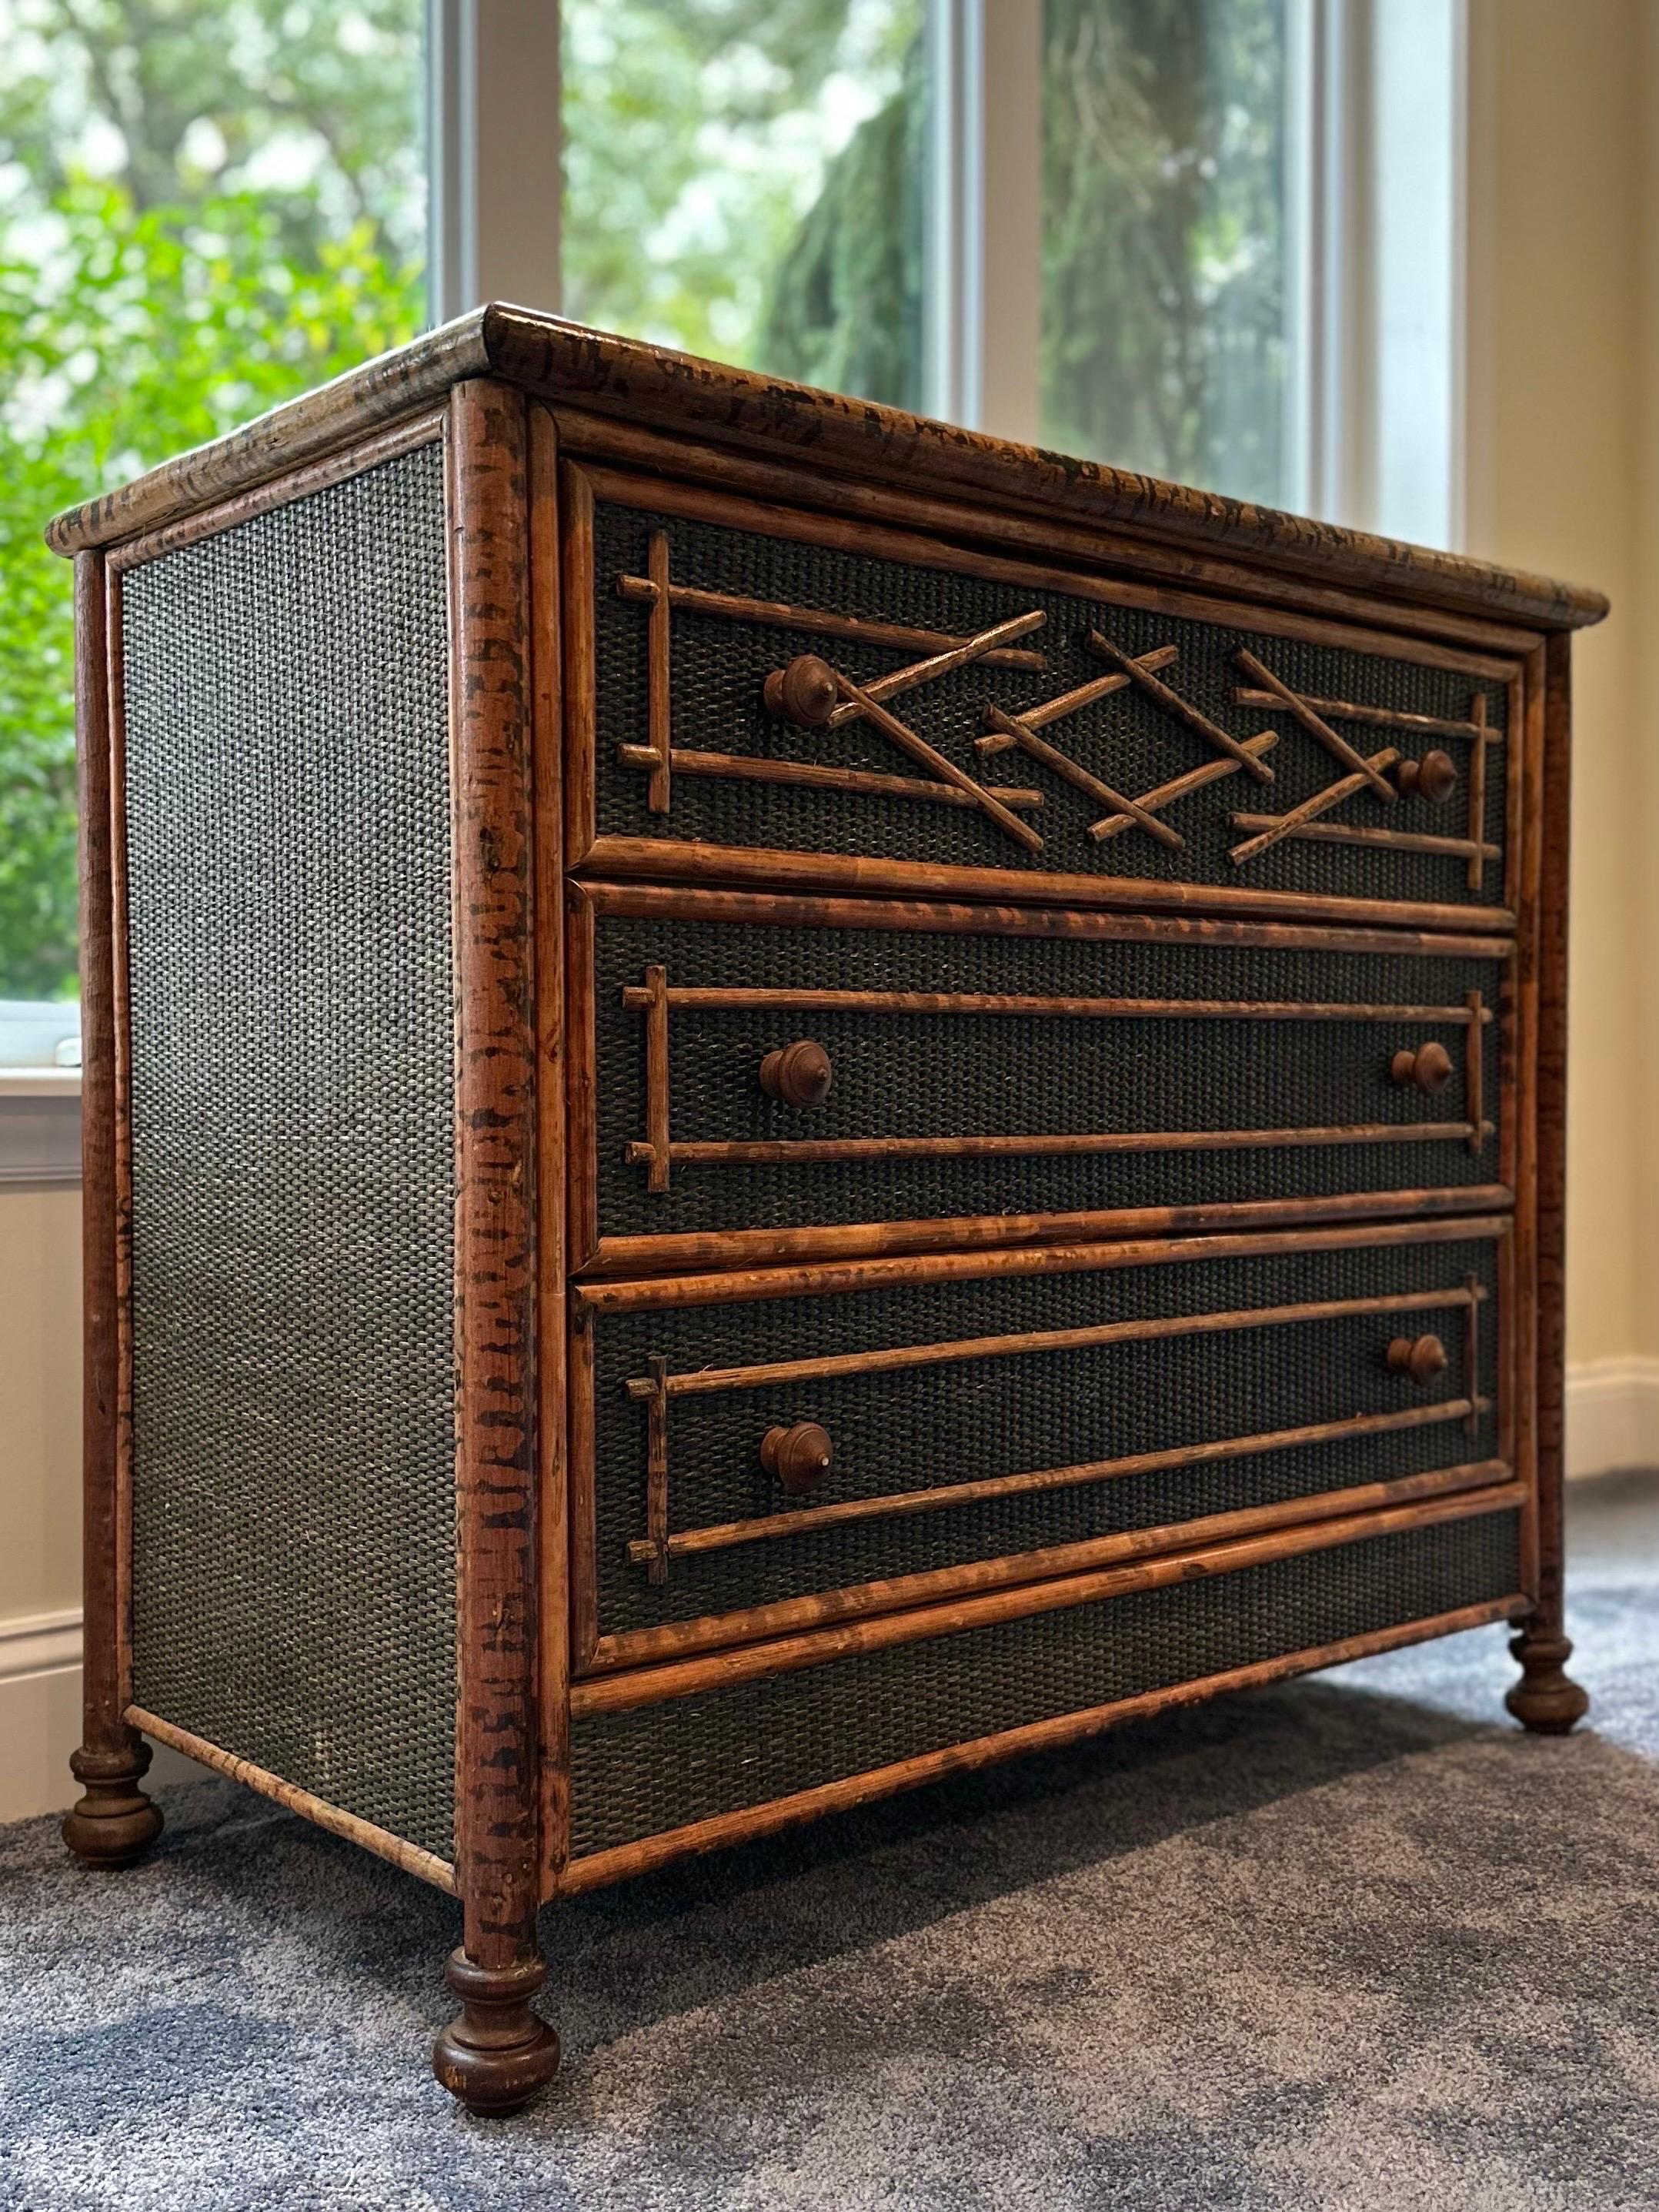 British Colonial coastal style burnt bamboo and cane dresser with three spacious drawers. Would work well in an entryway, living area, or bedroom. 